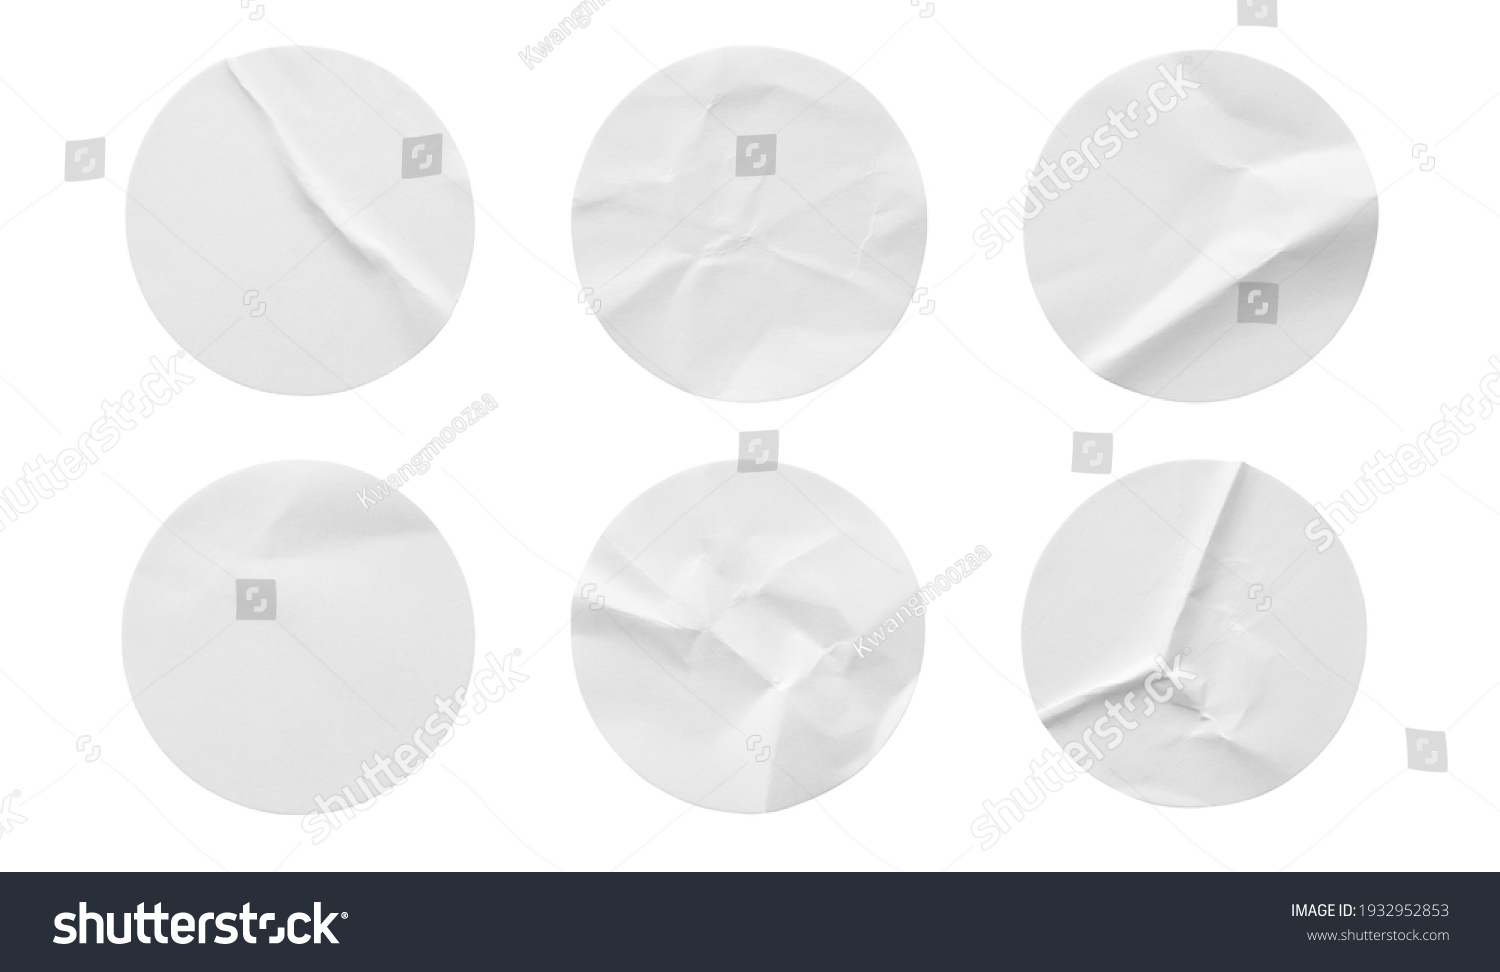 Blank white round paper sticker label set collection isolated on white background #1932952853